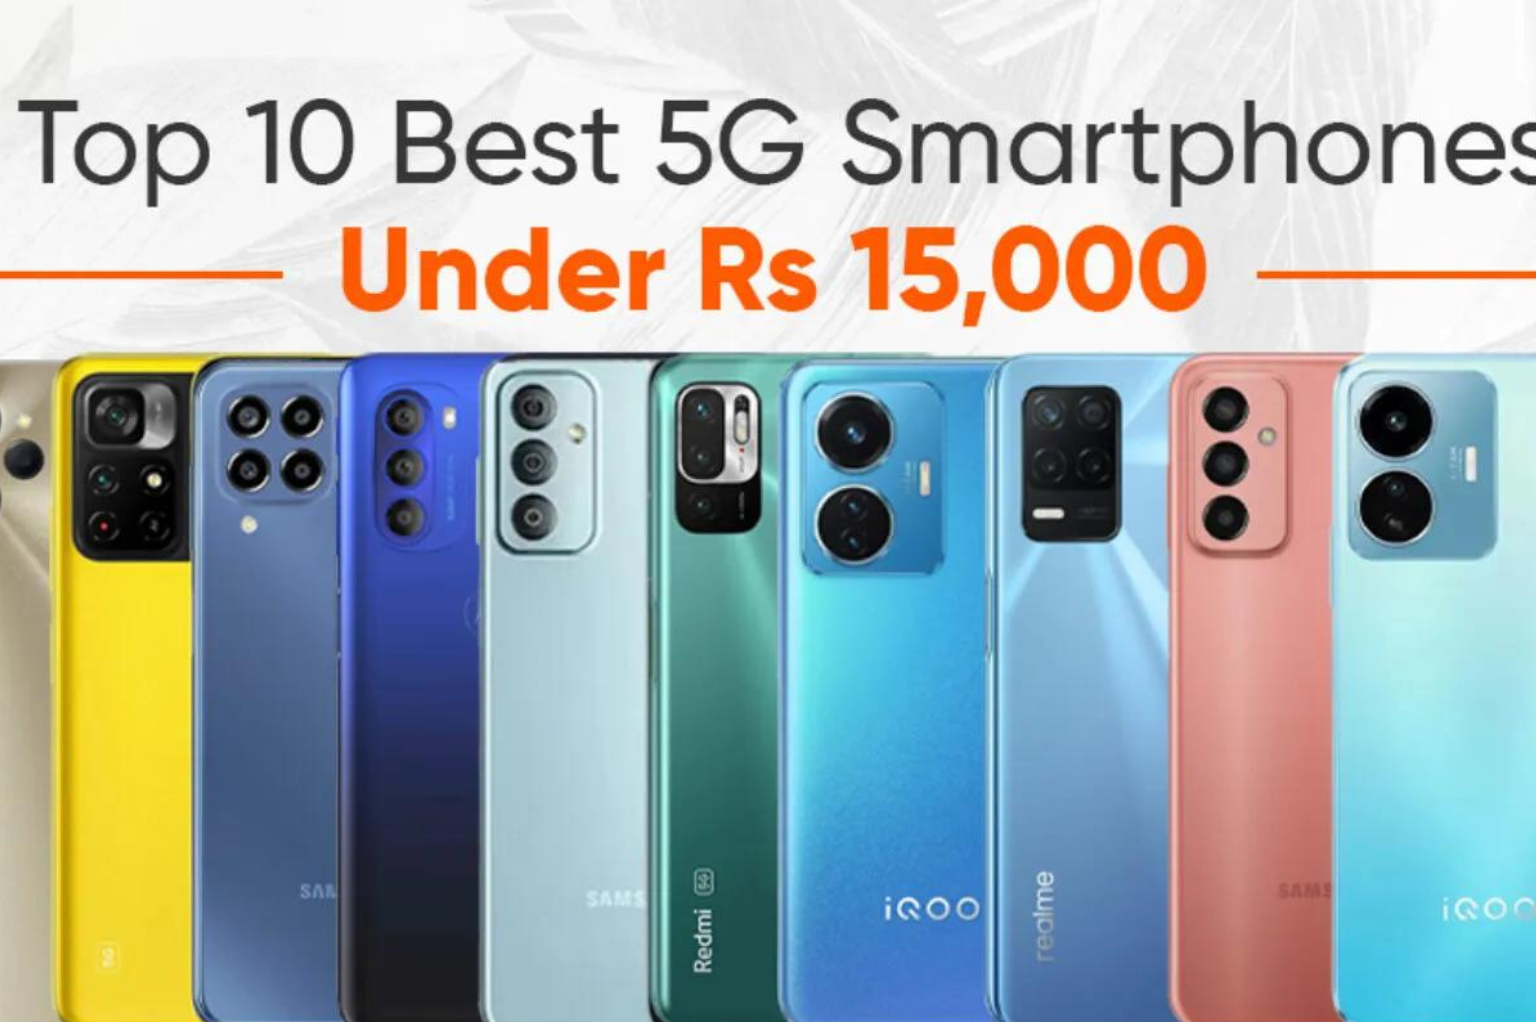 Best 5G Phones Under 15000: Prices and Specifications